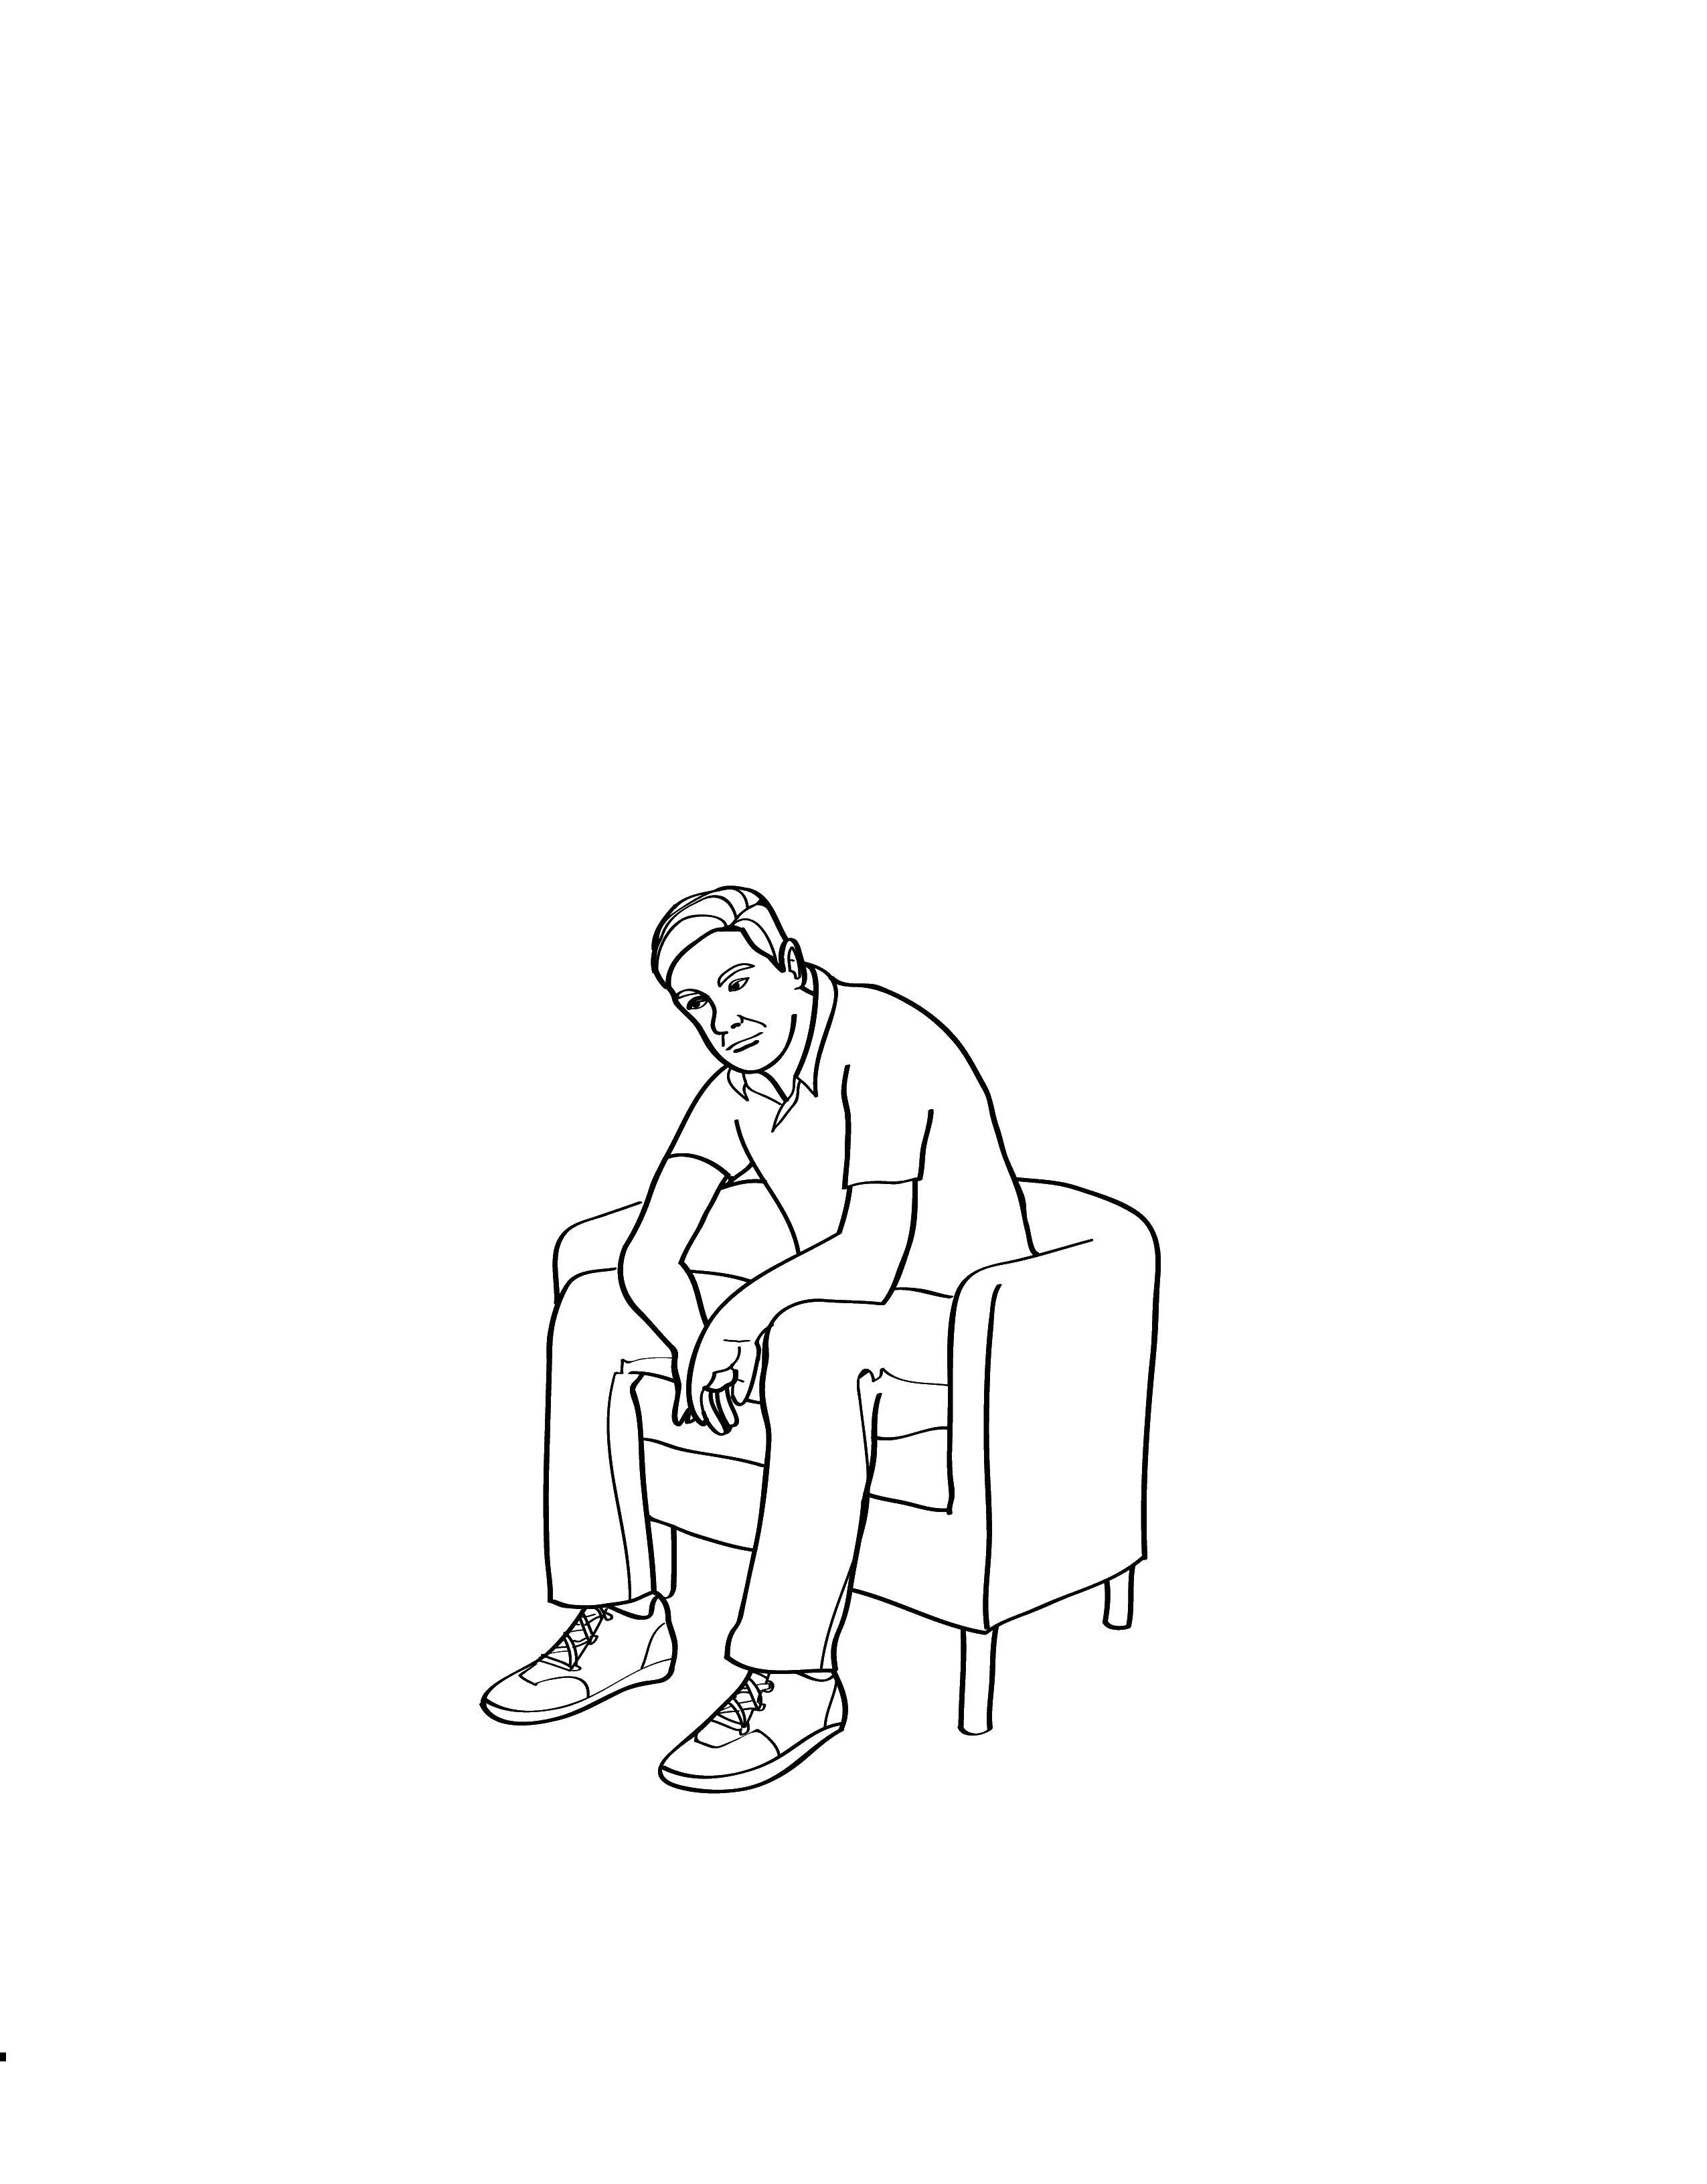 Coloring The man in the chair. Category People. Tags:  man, chair.